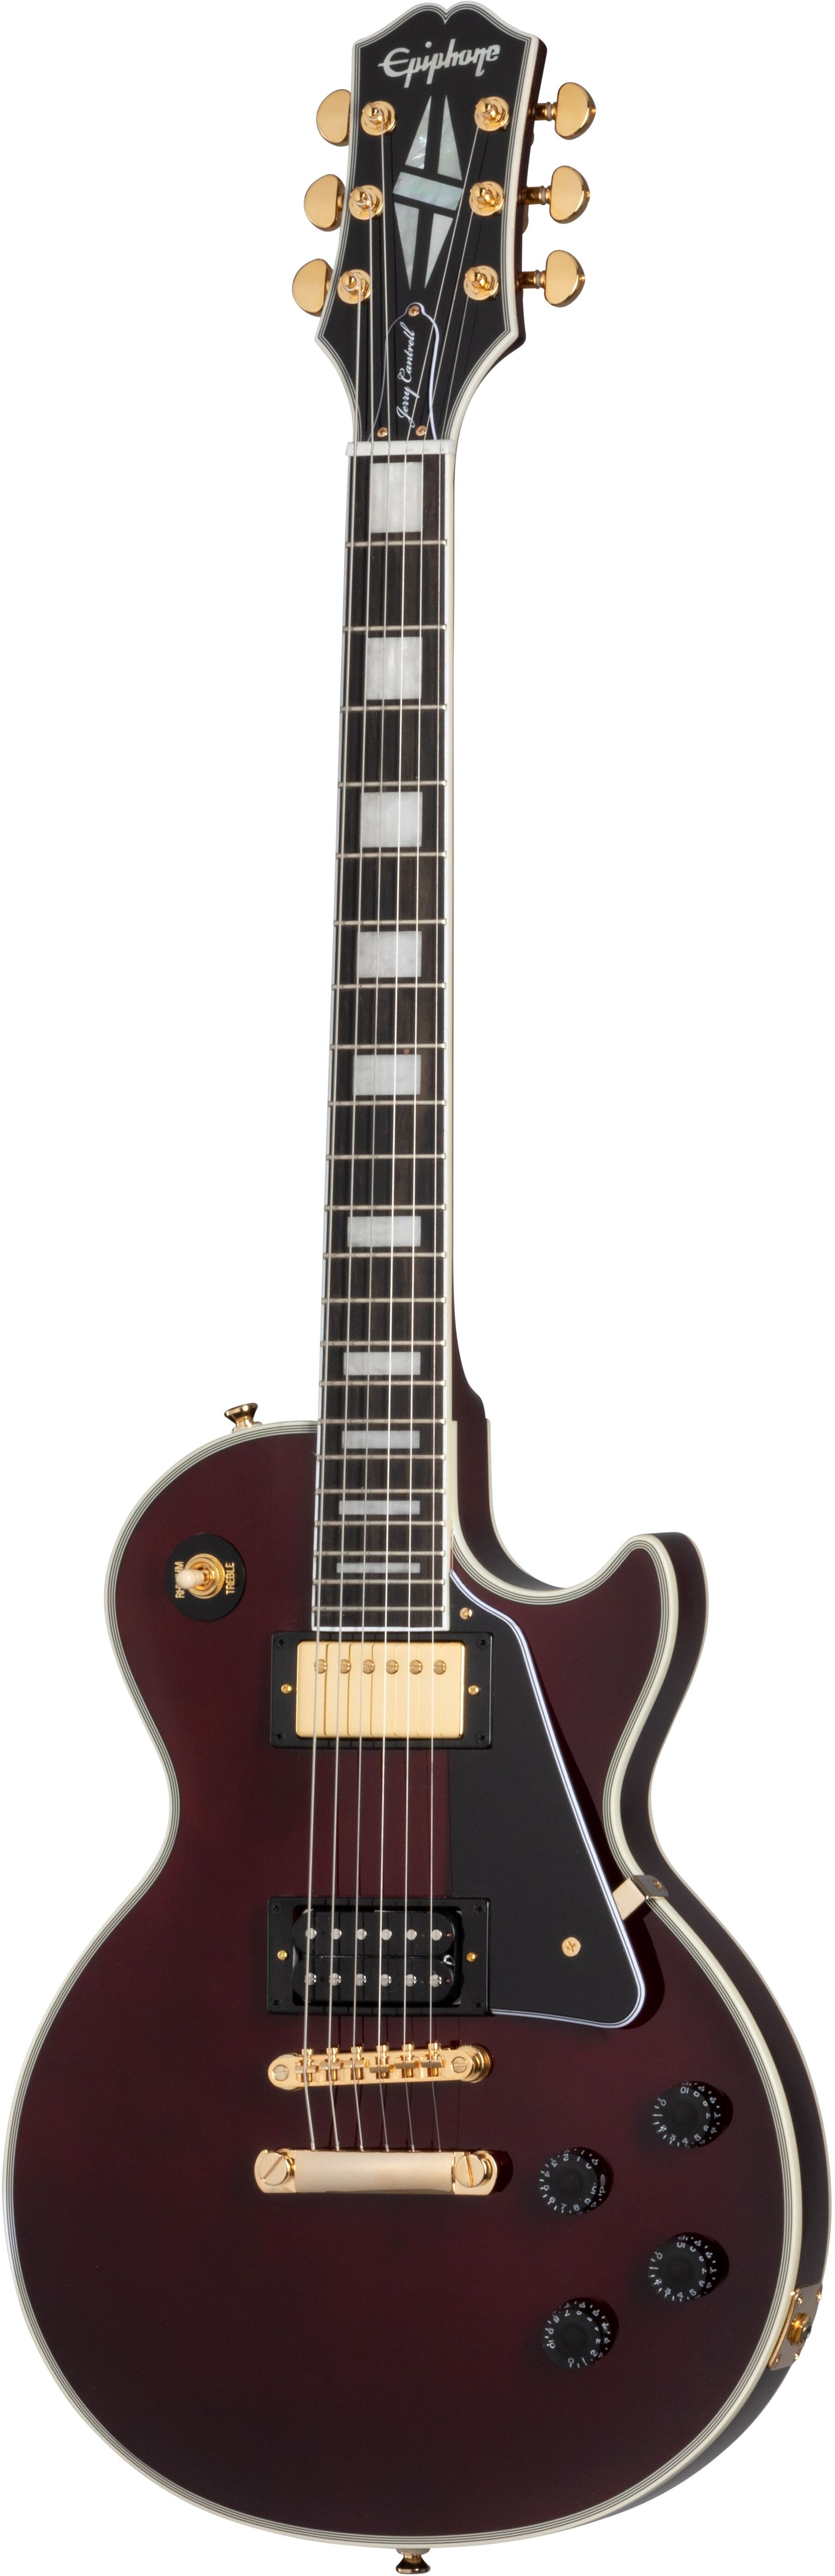 Epiphone Jerry Cantrell Wino LP Cust Wine Red W/C -  EILCJCWRGH3